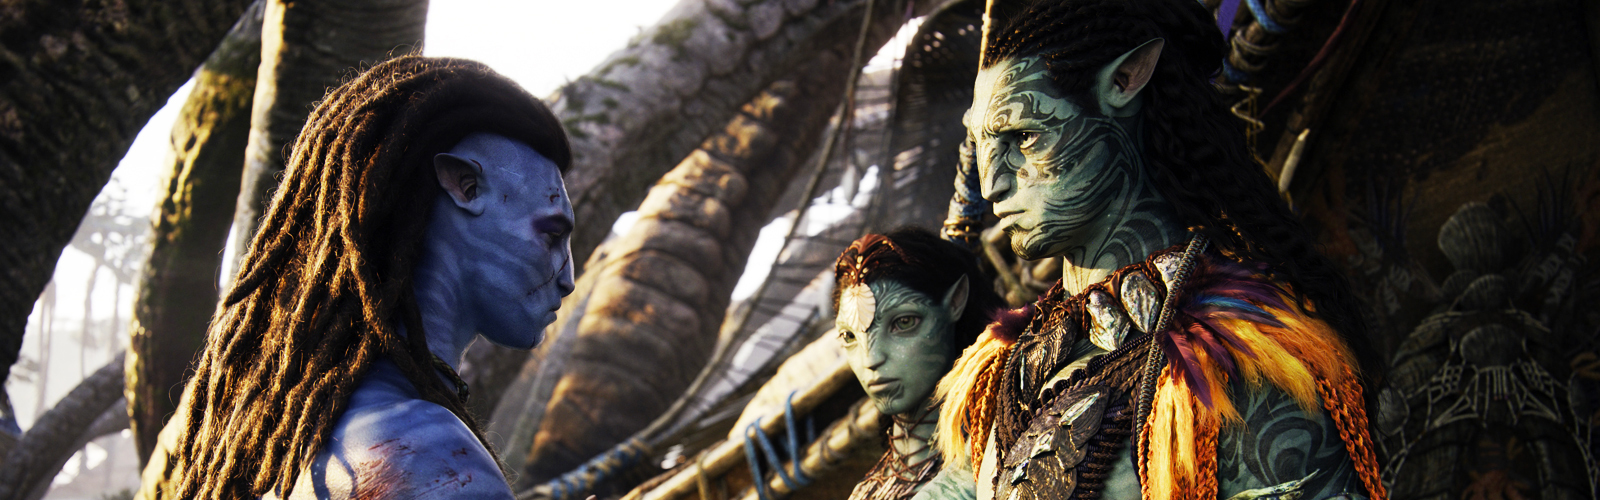 Yes, ‘Avatar: The Way Of Water’ Producer Jon Landau Thinks ‘Avatar’ Has A Cultural Impact